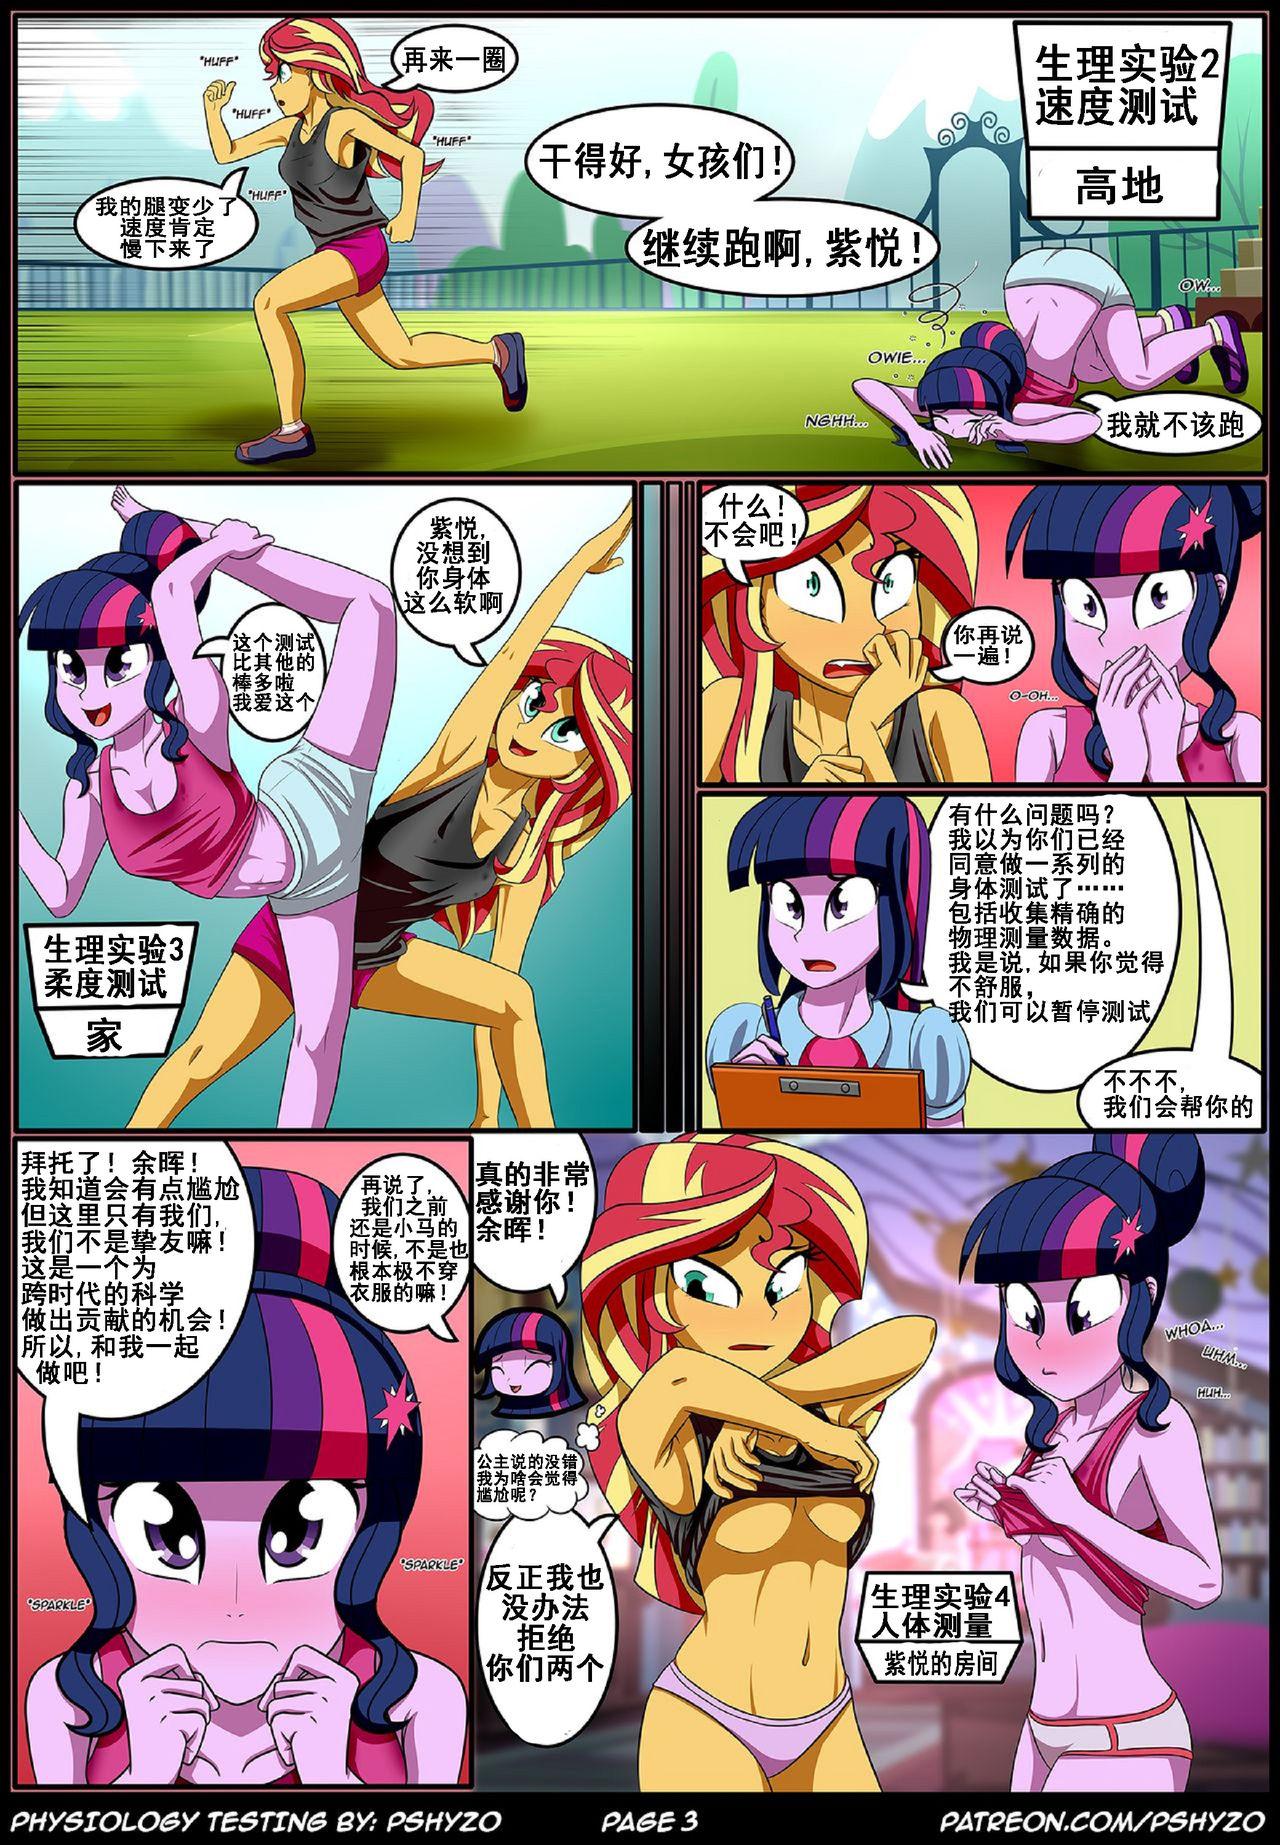 Perfect Body Physiology Testing - Equestria girls Trimmed - Page 4